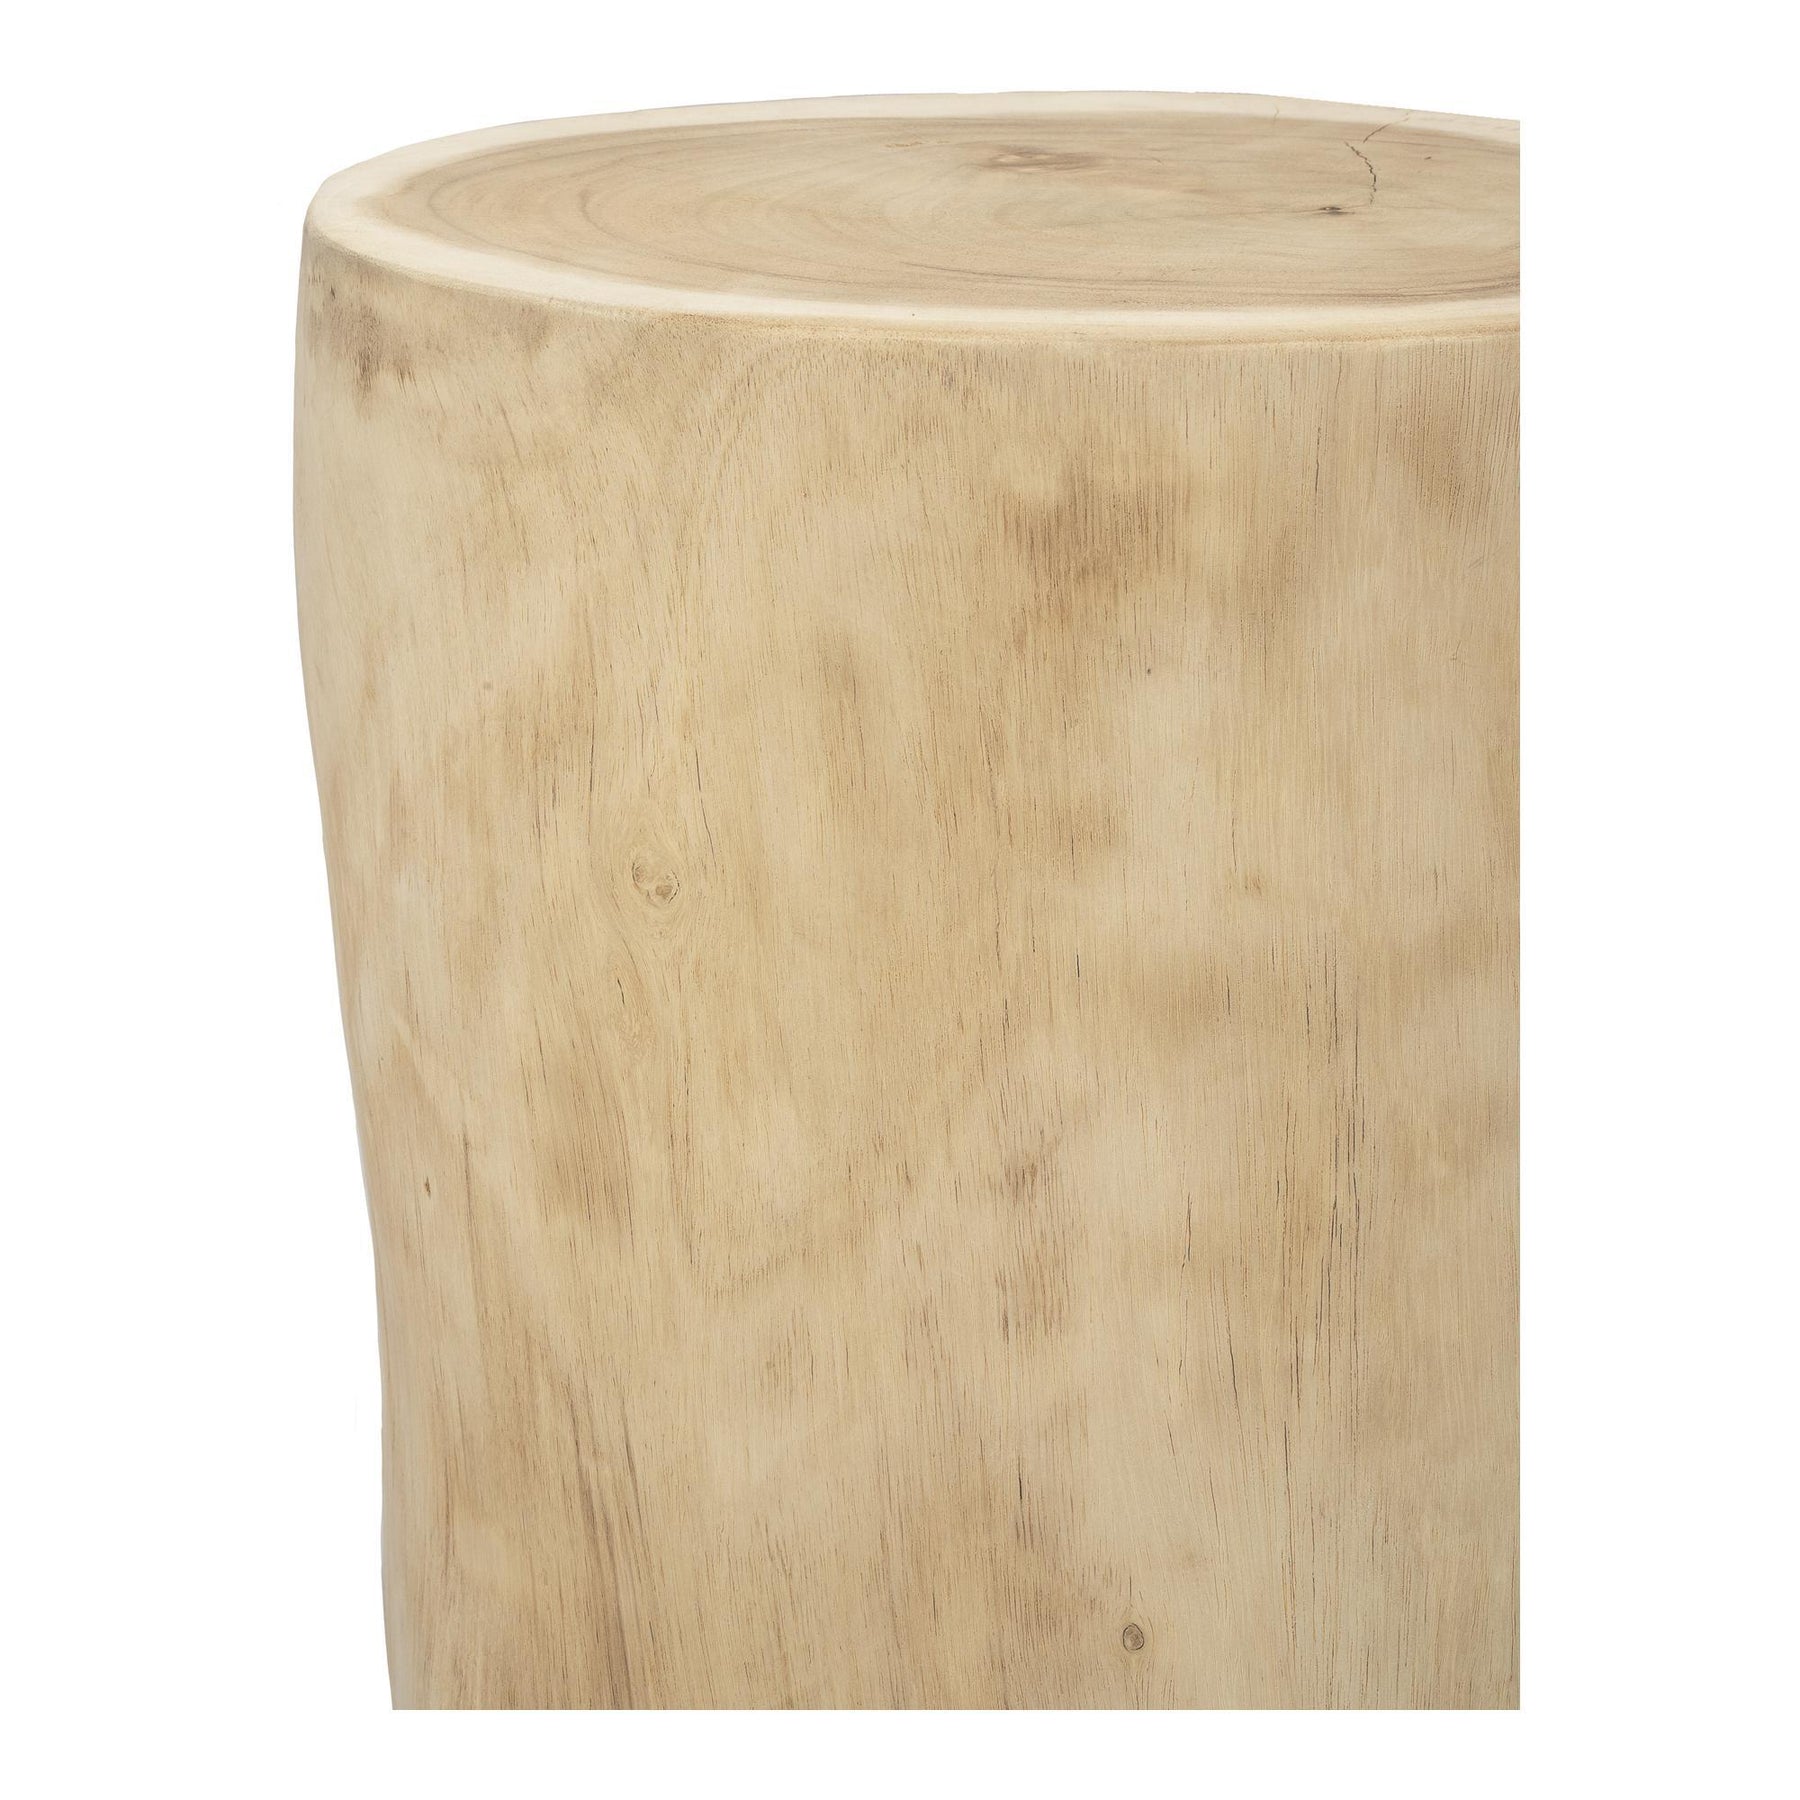 Moe's Home Collection Dendra Accent Table Natural - EI-1071-24